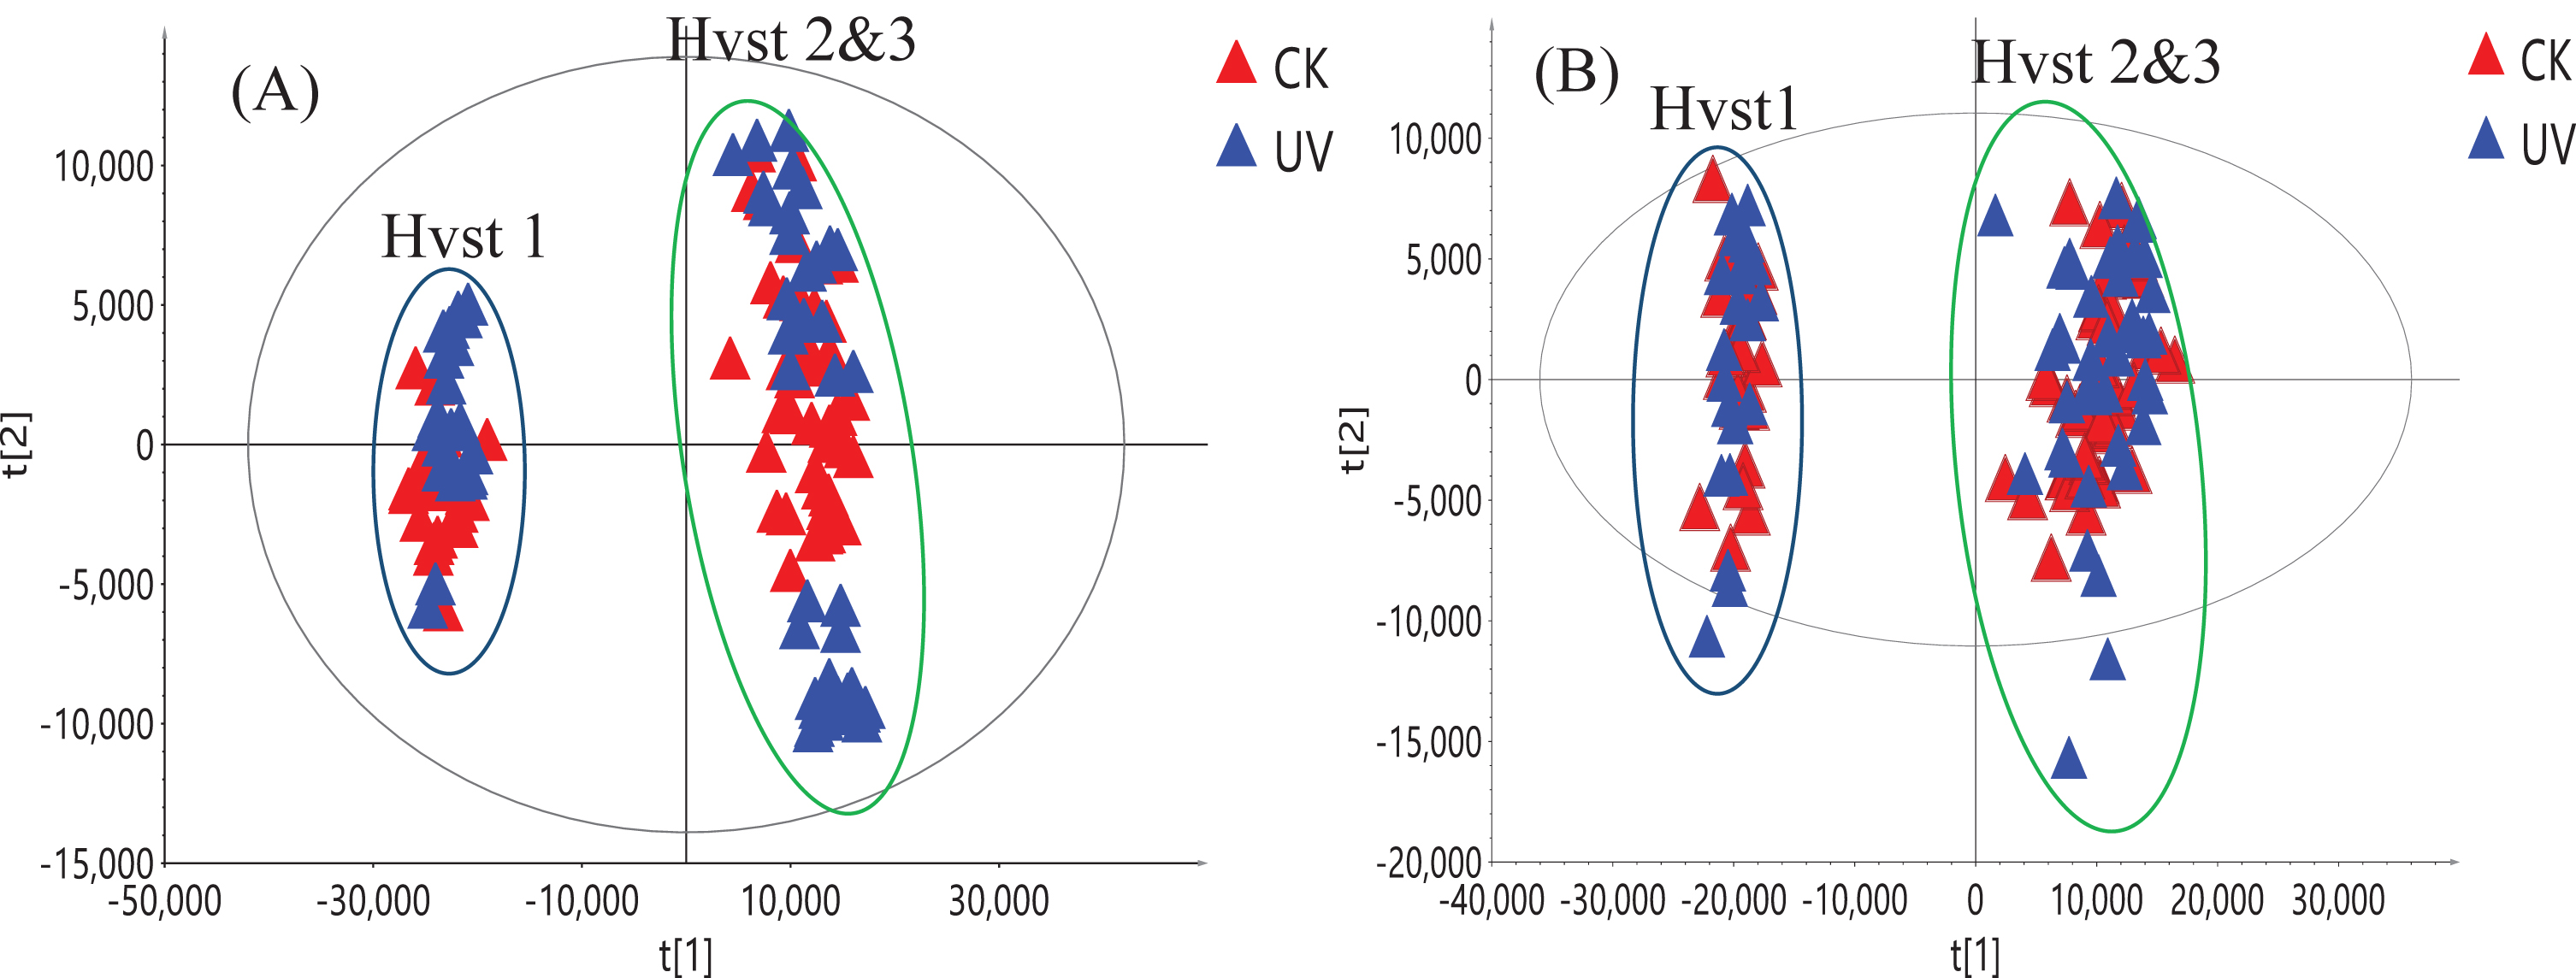 PCA score plot of 126 strawberry samples from three harvests (Hvst1-3) using positive ionization (A) and negative ionization data (B). Blue triangles represent samples from strawberries treated with UV-C and red triangles are from the control (CK) samples.